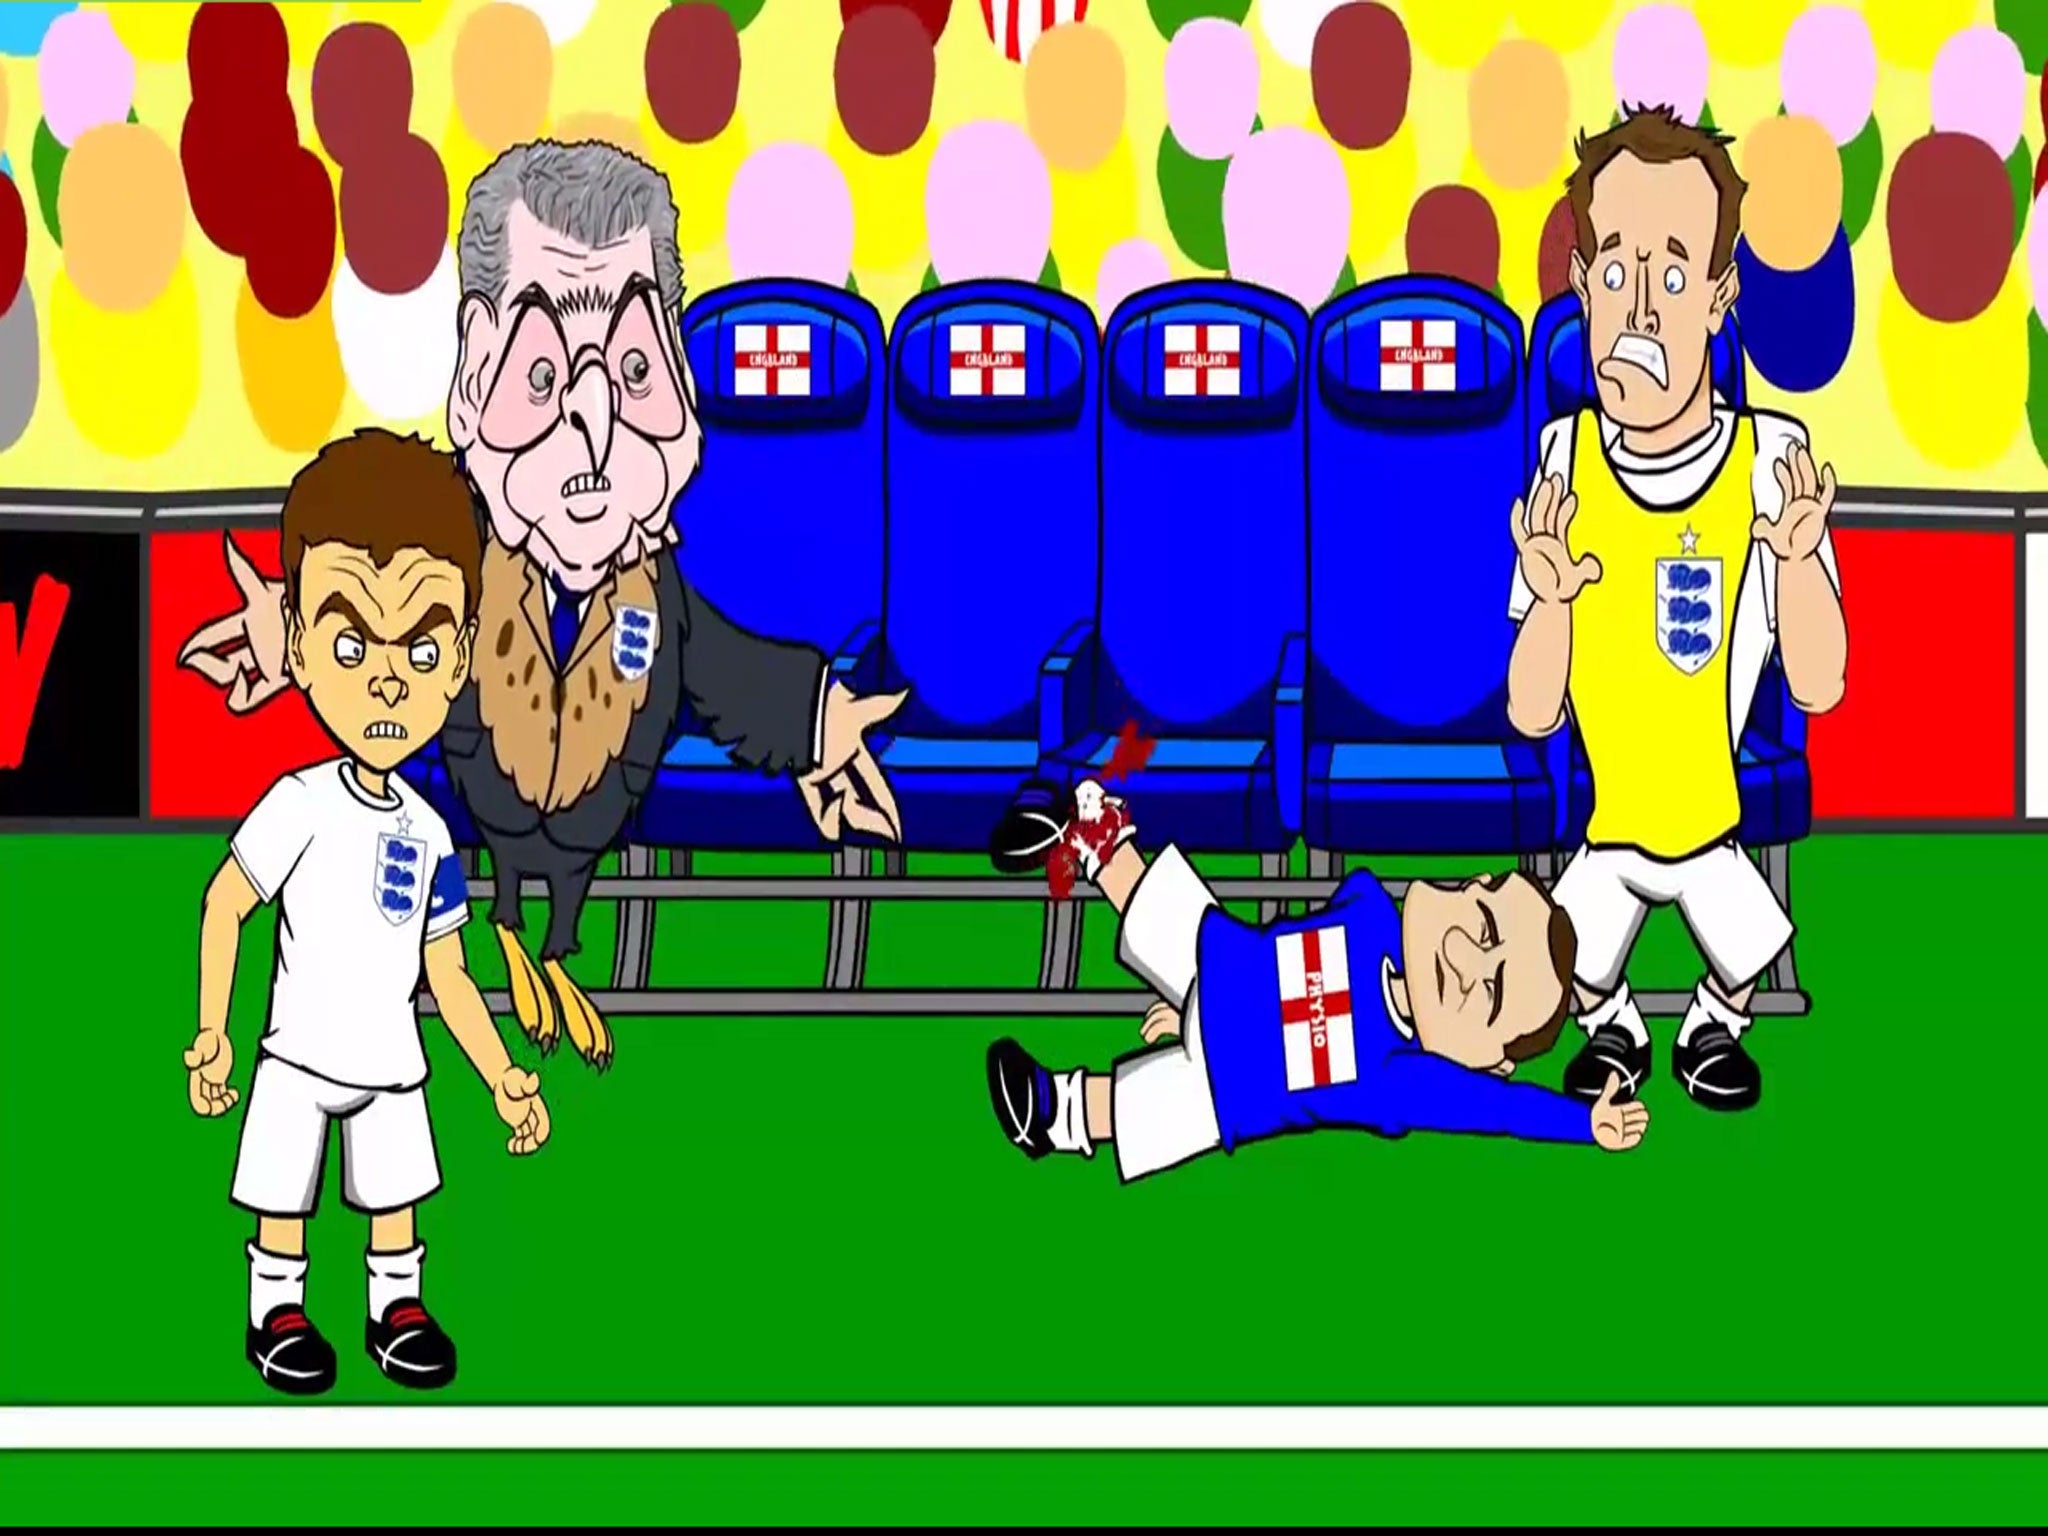 A cartoon created by 442oon, depicting England's 2-1 loss against Italy in the World Cup